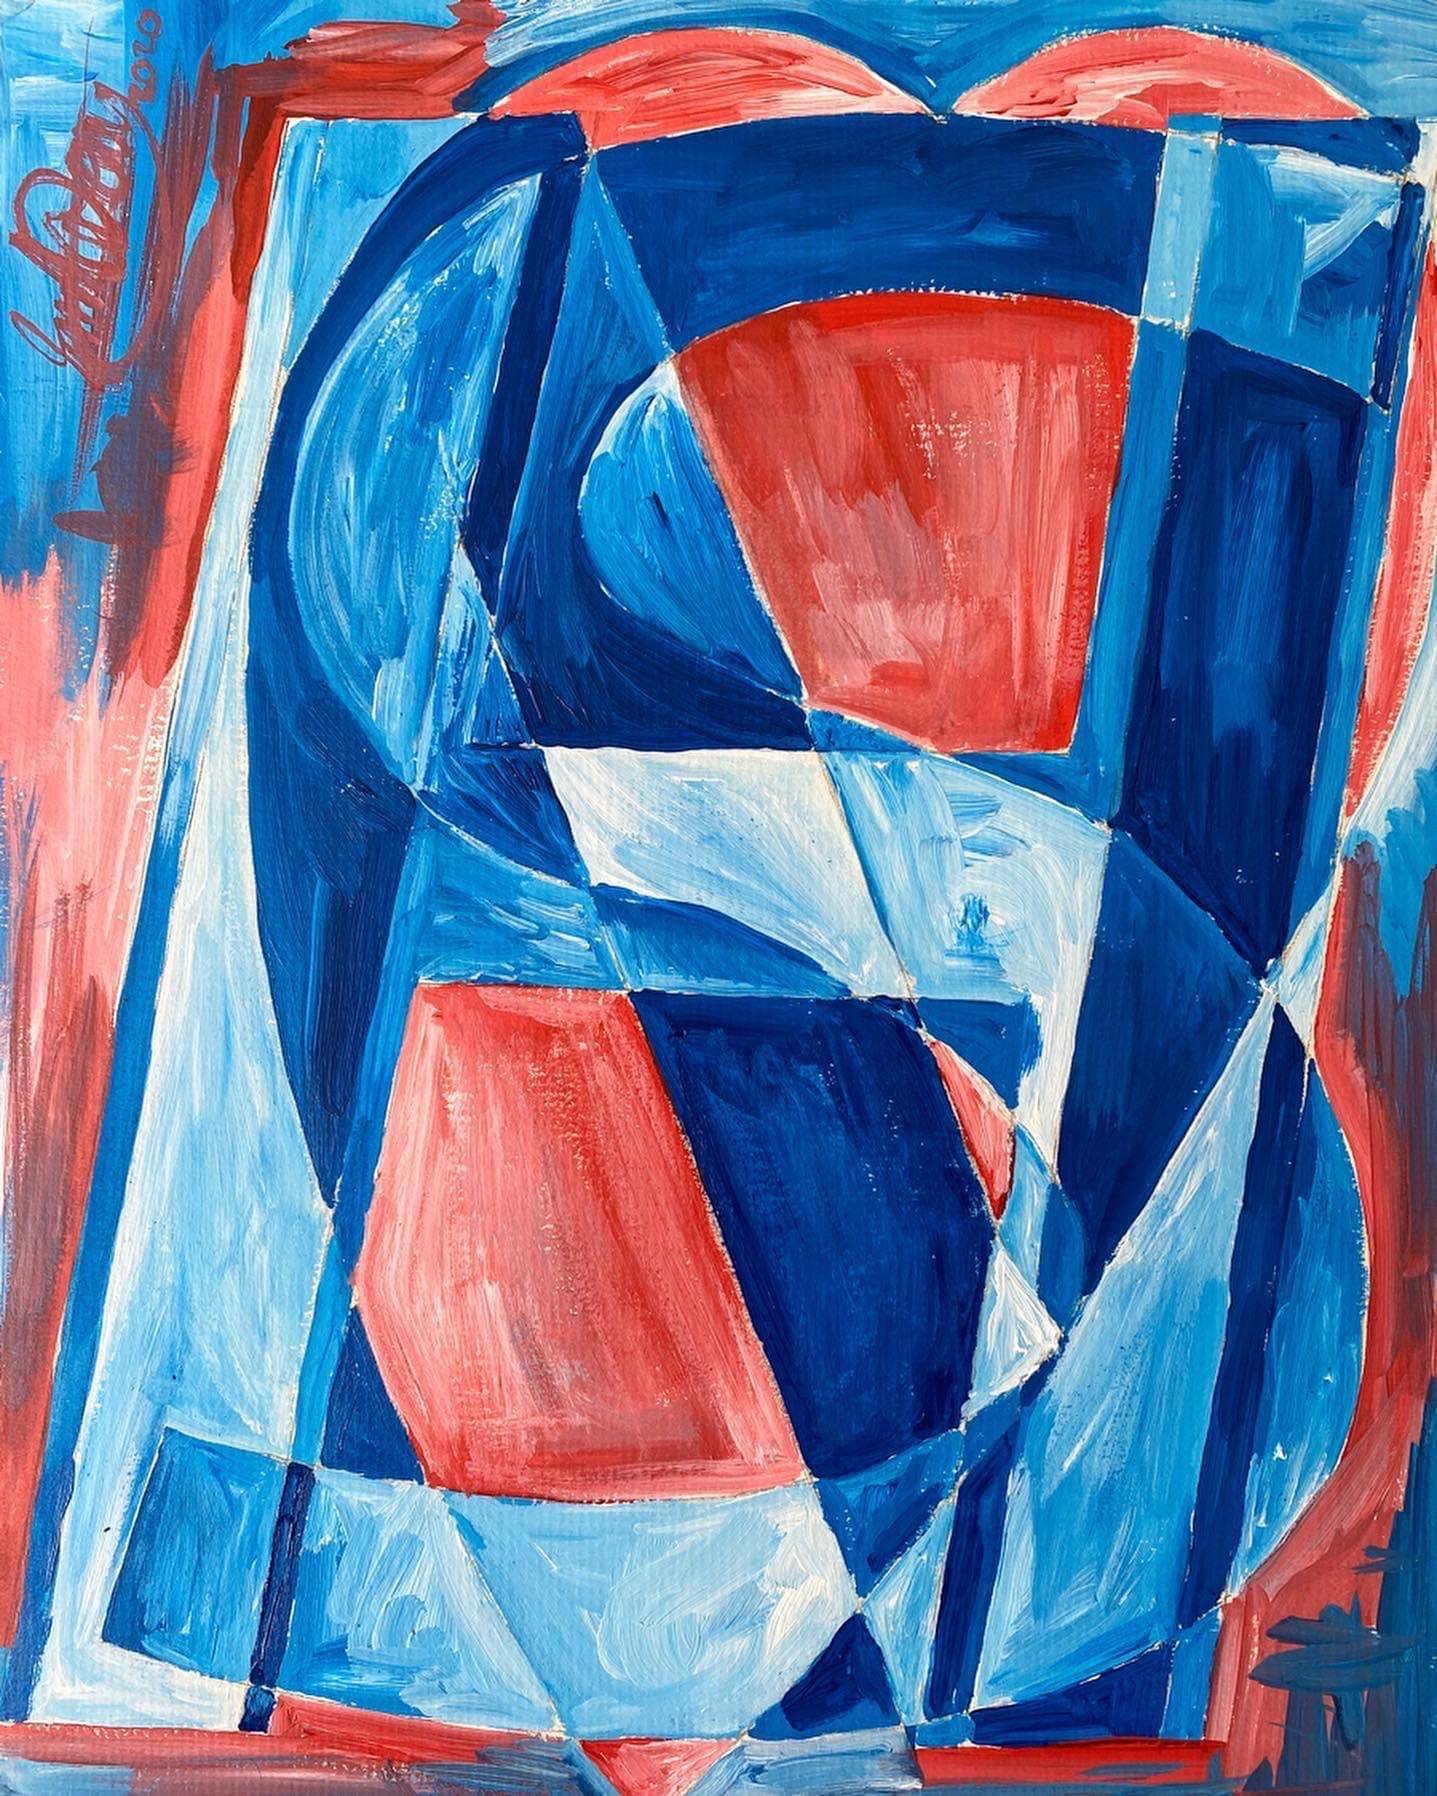 My tribute to the NHS, influenced by Jasper Johns' 1961 piece "Zero Through Nine"